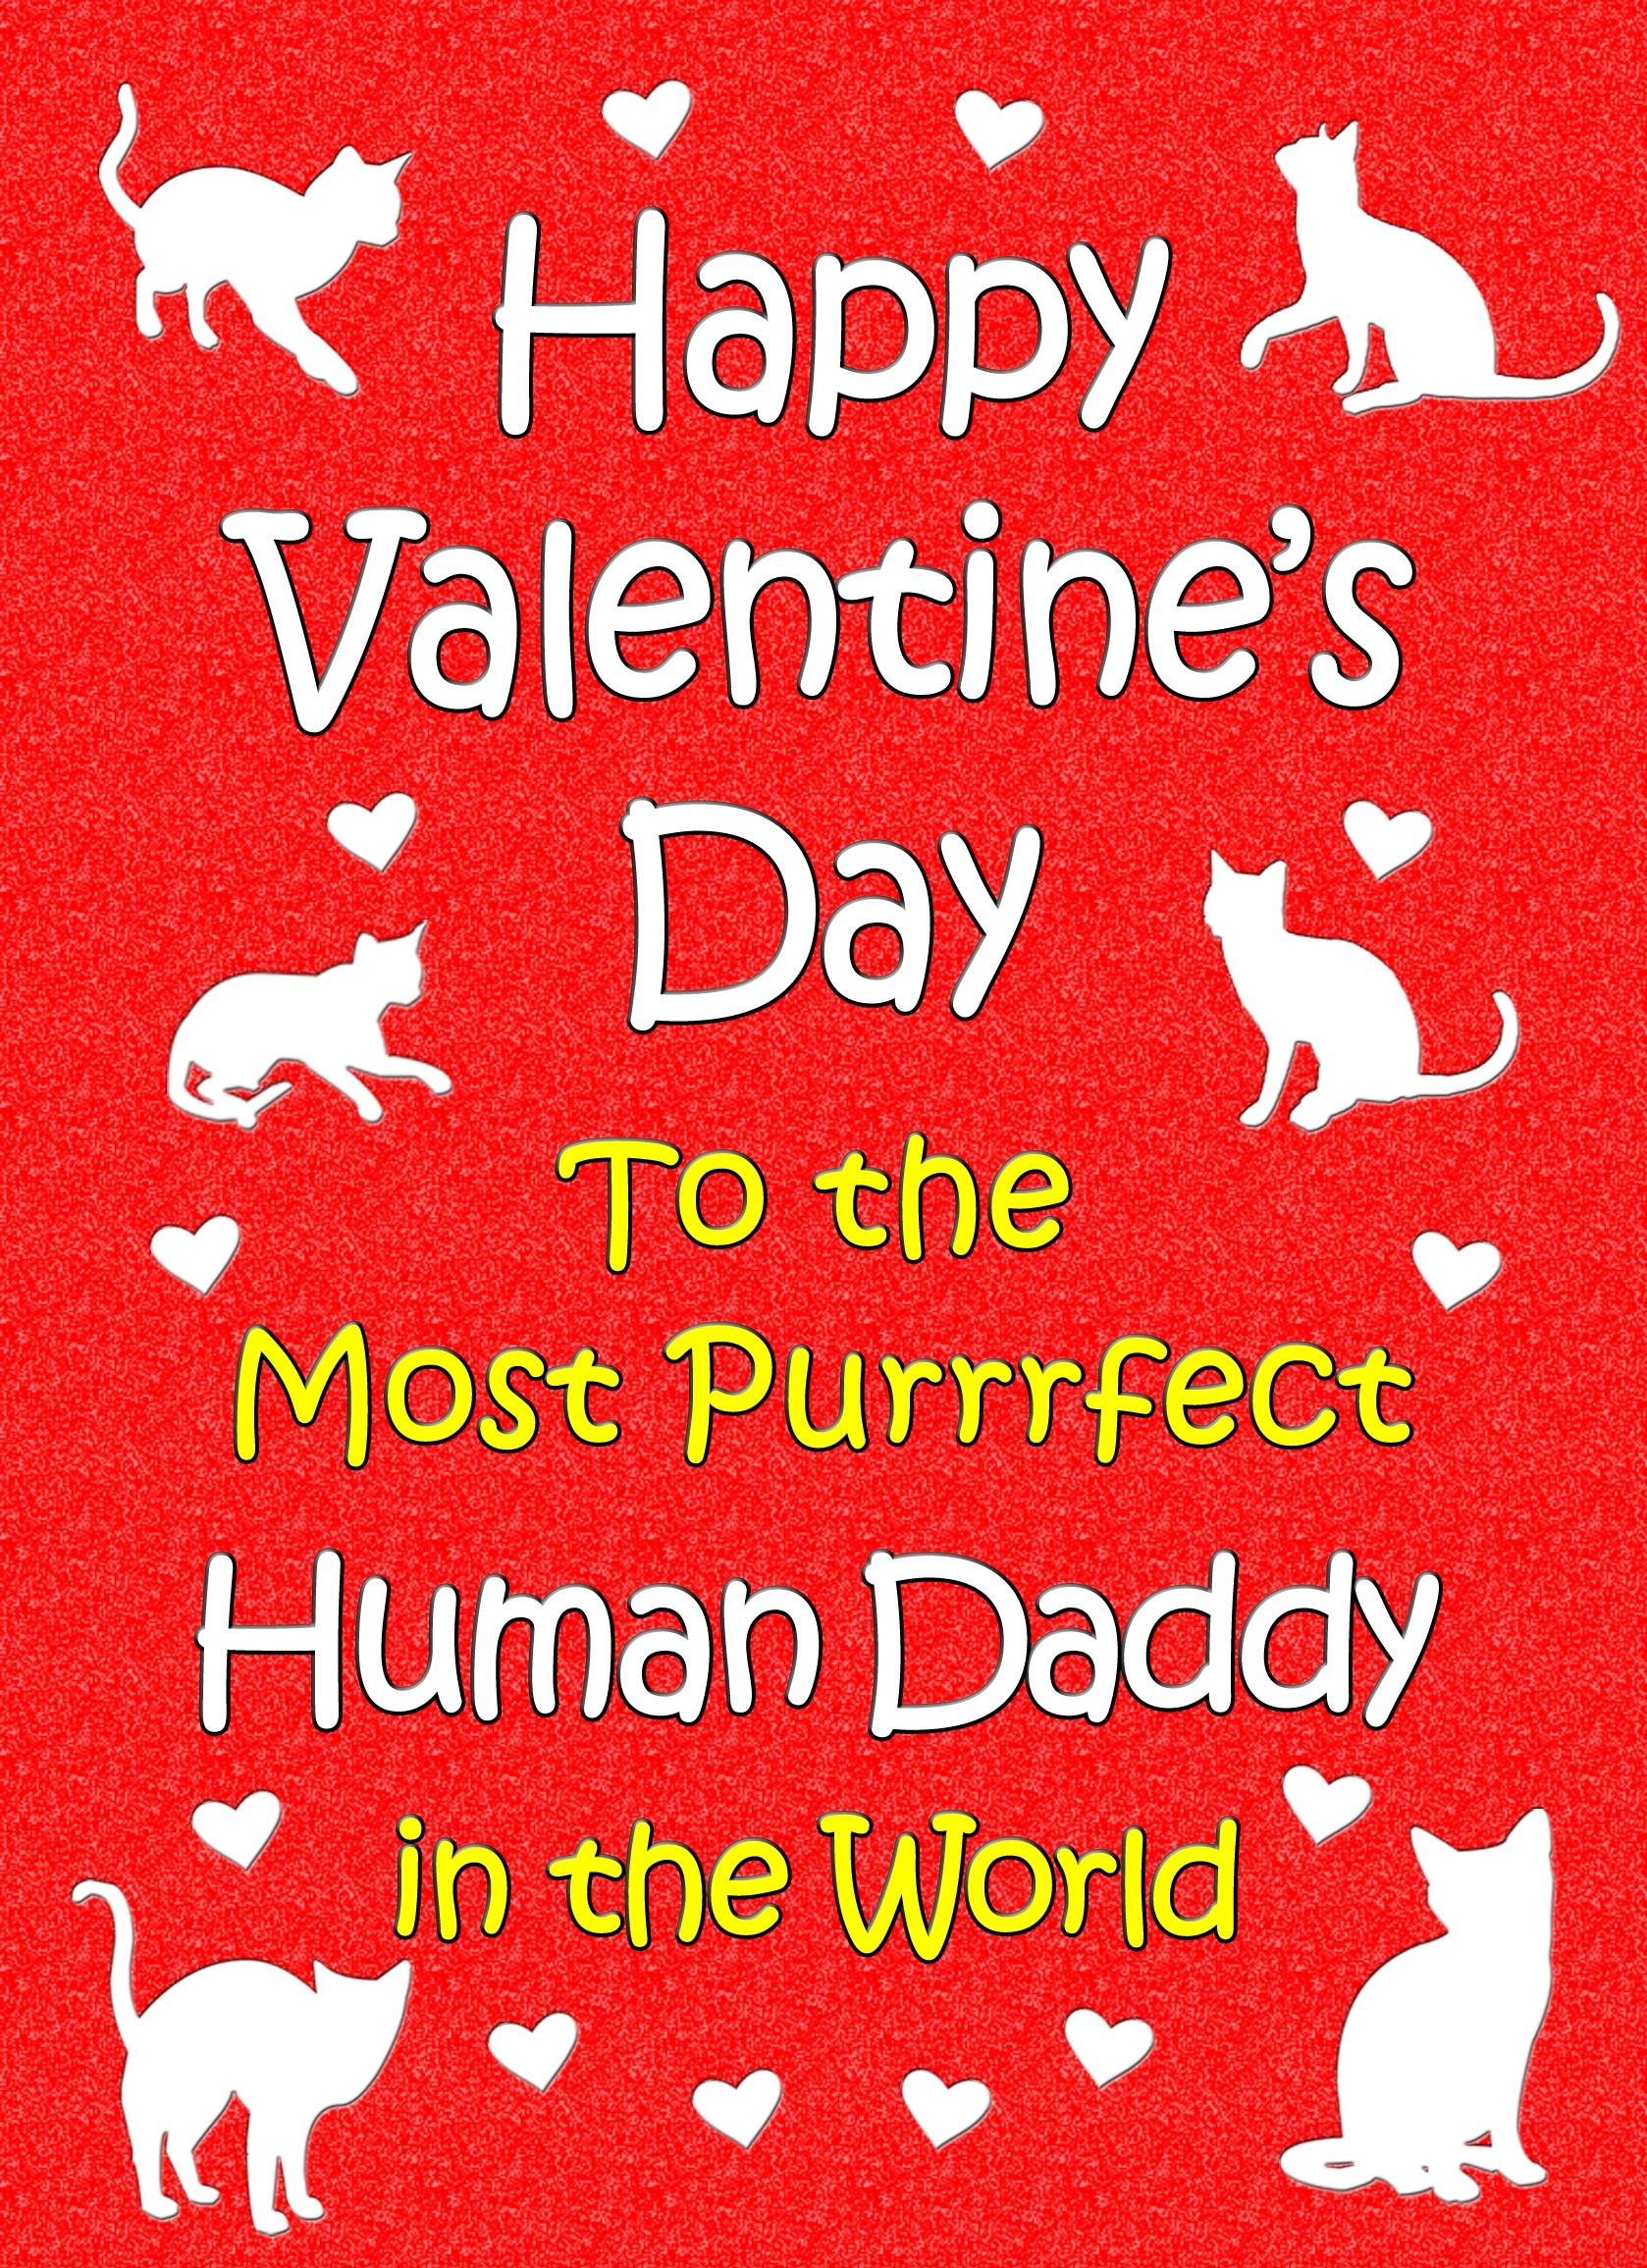 From The Cat Valentines Day Card (Human Daddy)